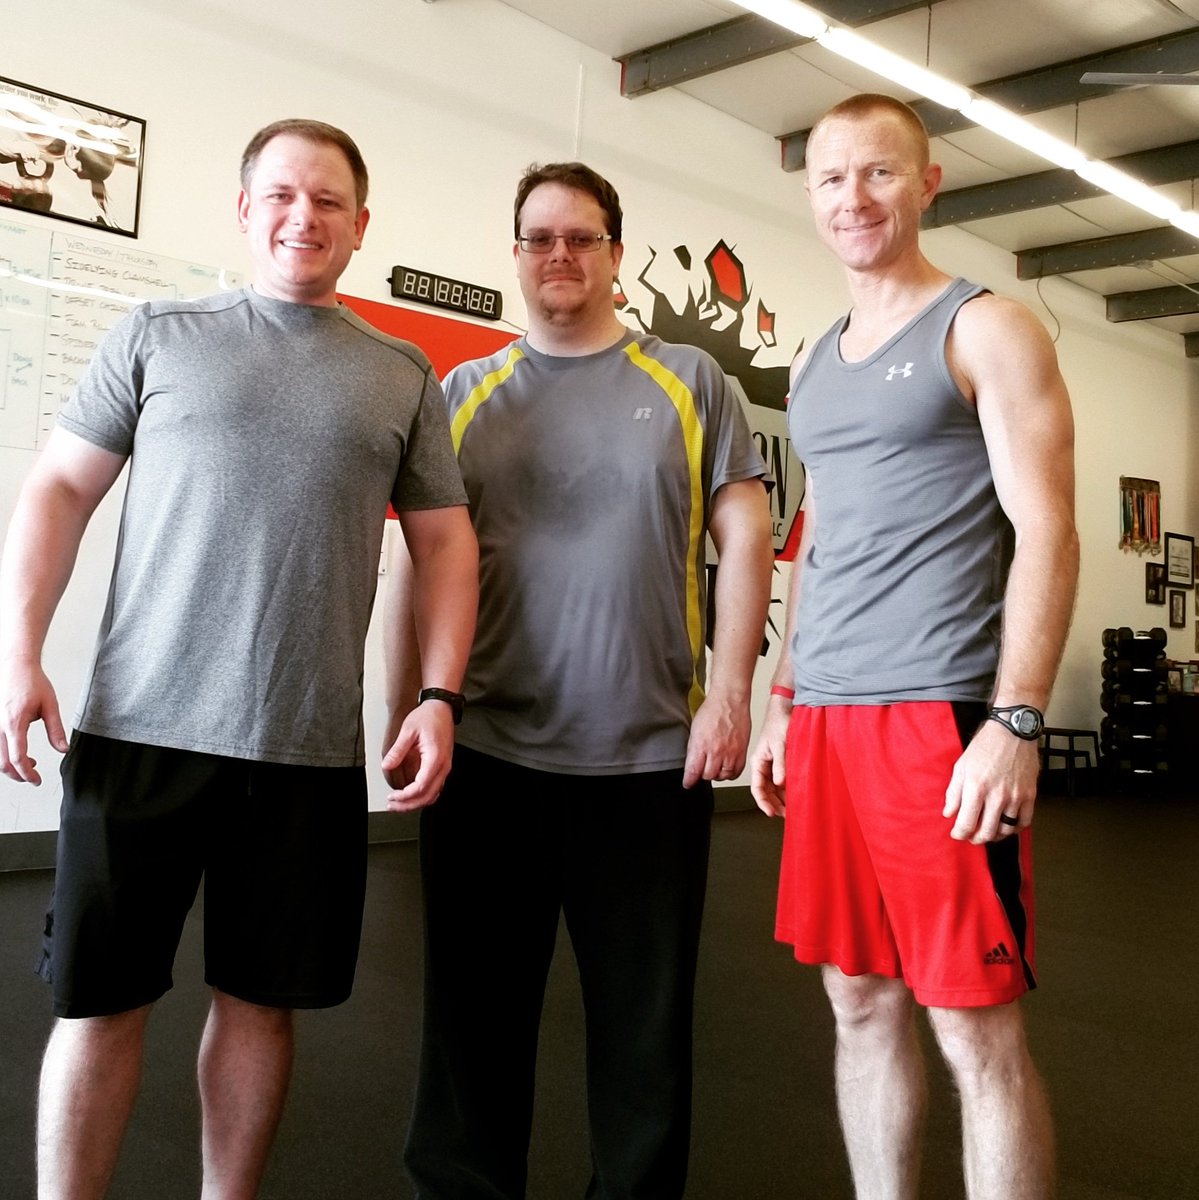 These guys killed it today!💪👊Thanks for working hard and pushing me! #evolvewithshane #strongertoday #fit #power #strength #workout #workhard #workhardplayhard #lifting #pt #personaltrainer